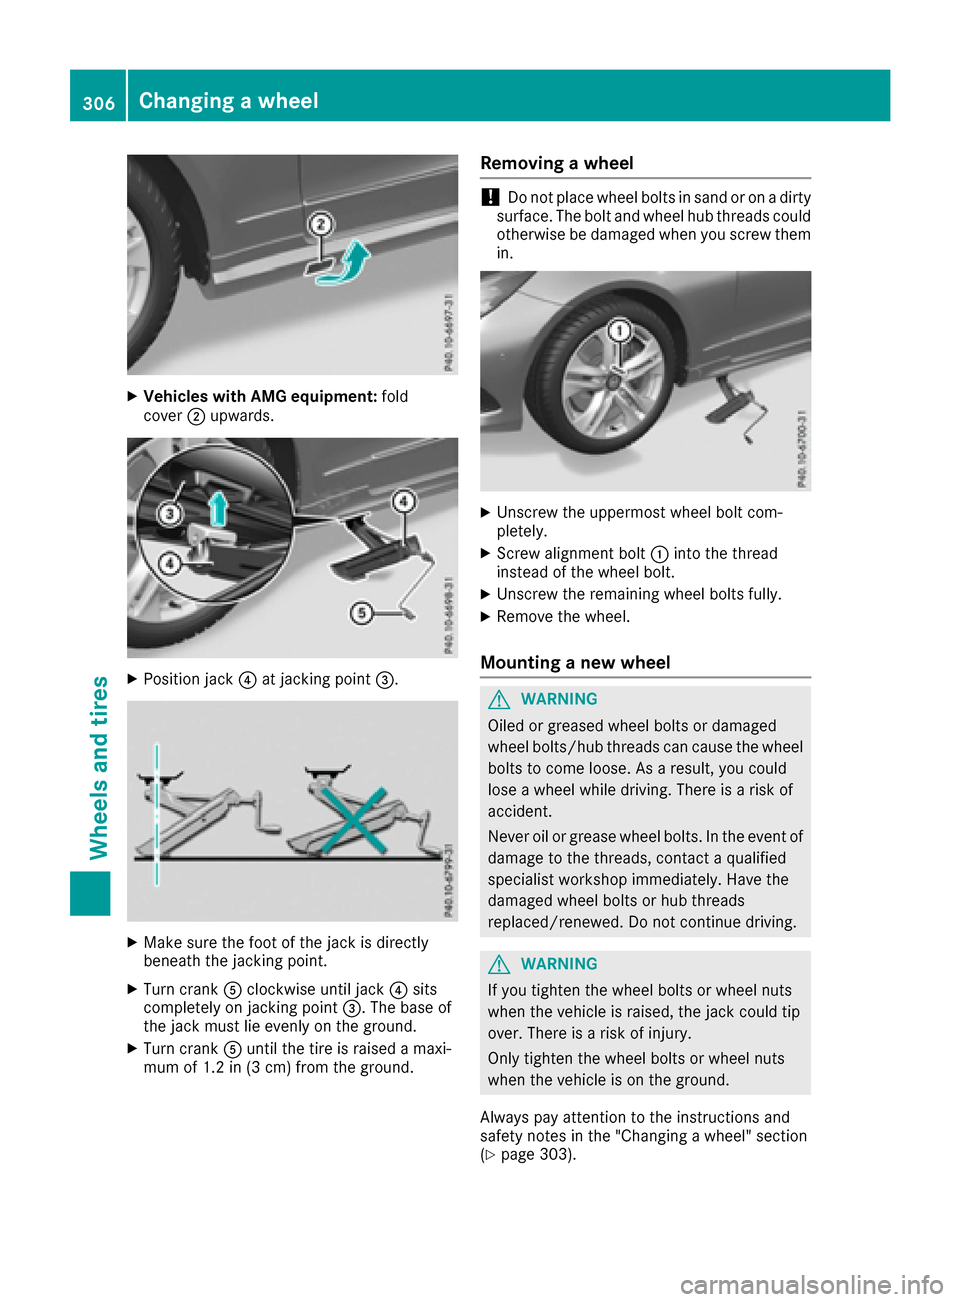 MERCEDES-BENZ E-Class CABRIOLET 2017 A207 Owners Manual XVehicles with AMG equipment:fold
cover ;upwards.
XPosition jack ?at jacking point =.
XMake sure the foot of the jack is directly
beneath the jacking point.
XTurn crankAclockwise until jack ?sits
comp